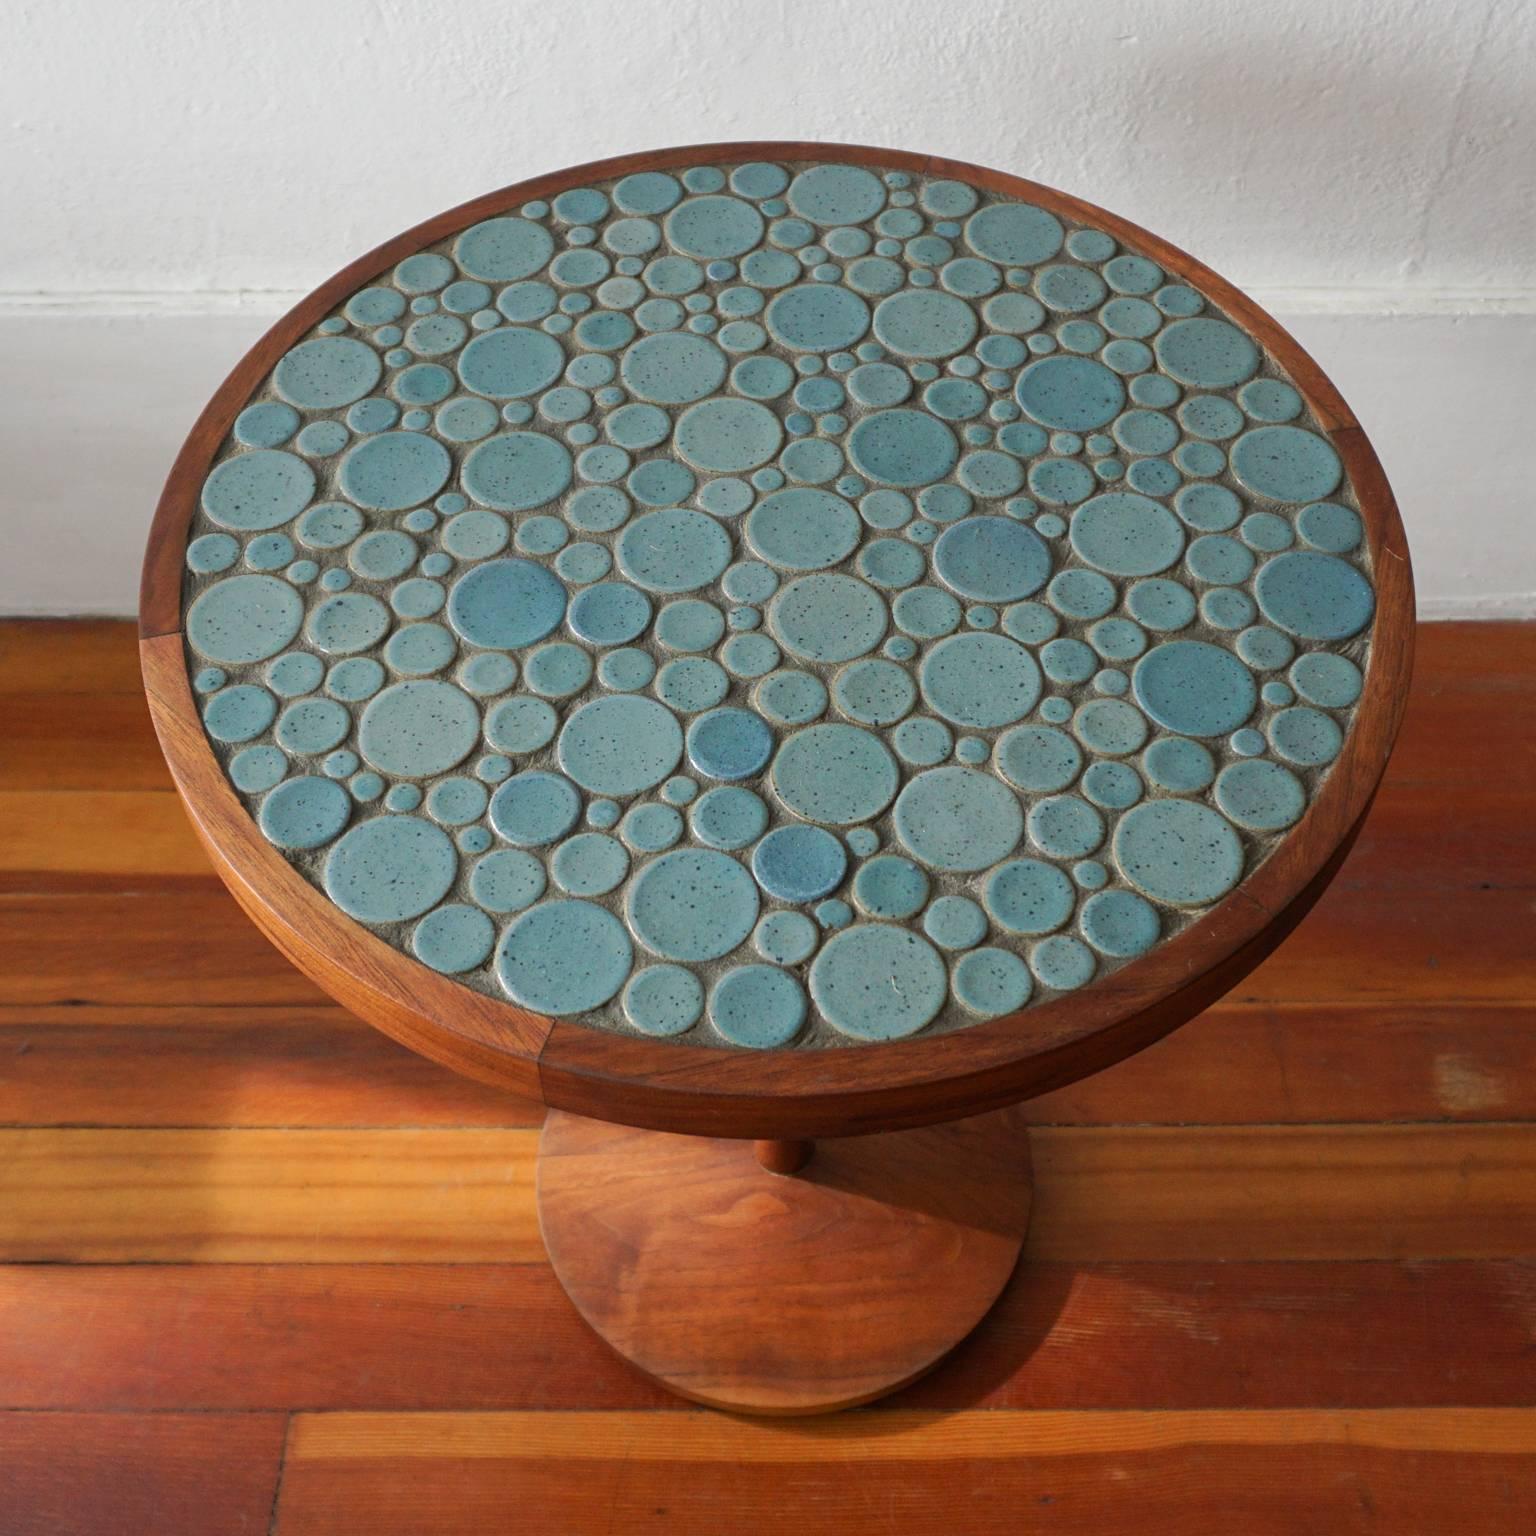 Side table constructed of solid walnut, with a coin ceramic tile top in a blue glaze. Jane and Gordon Martz for their company, Marshall Studios, 1950s.